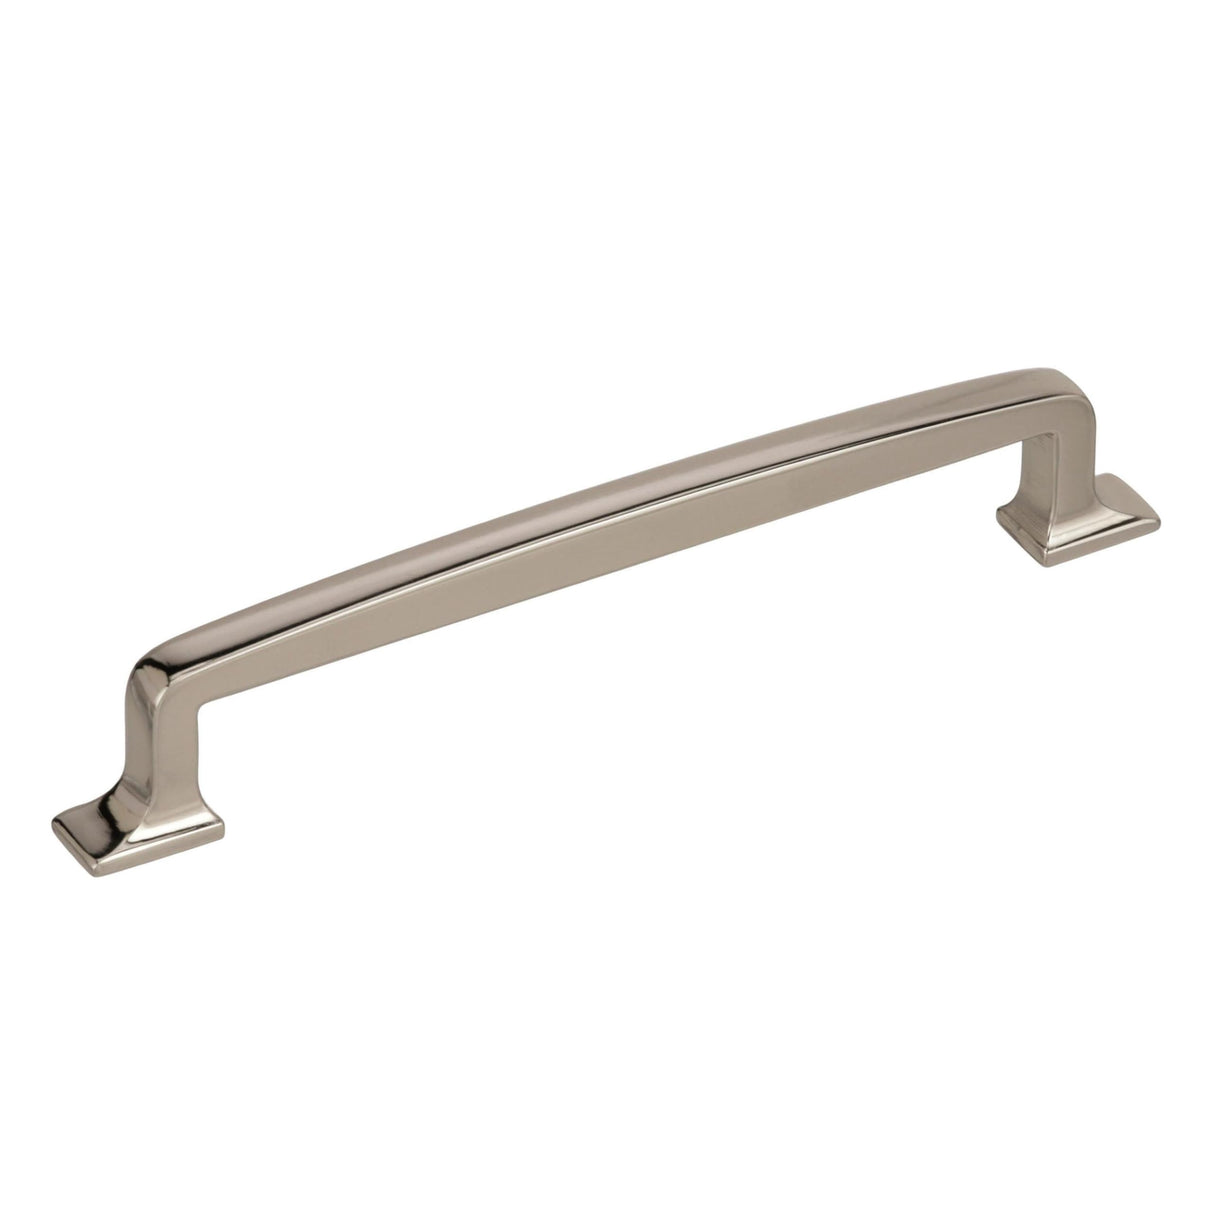 Amerock Cabinet Pull Polished Nickel 6-5/16 inch (160 mm) Center to Center Westerly 1 Pack Drawer Pull Drawer Handle Cabinet Hardware